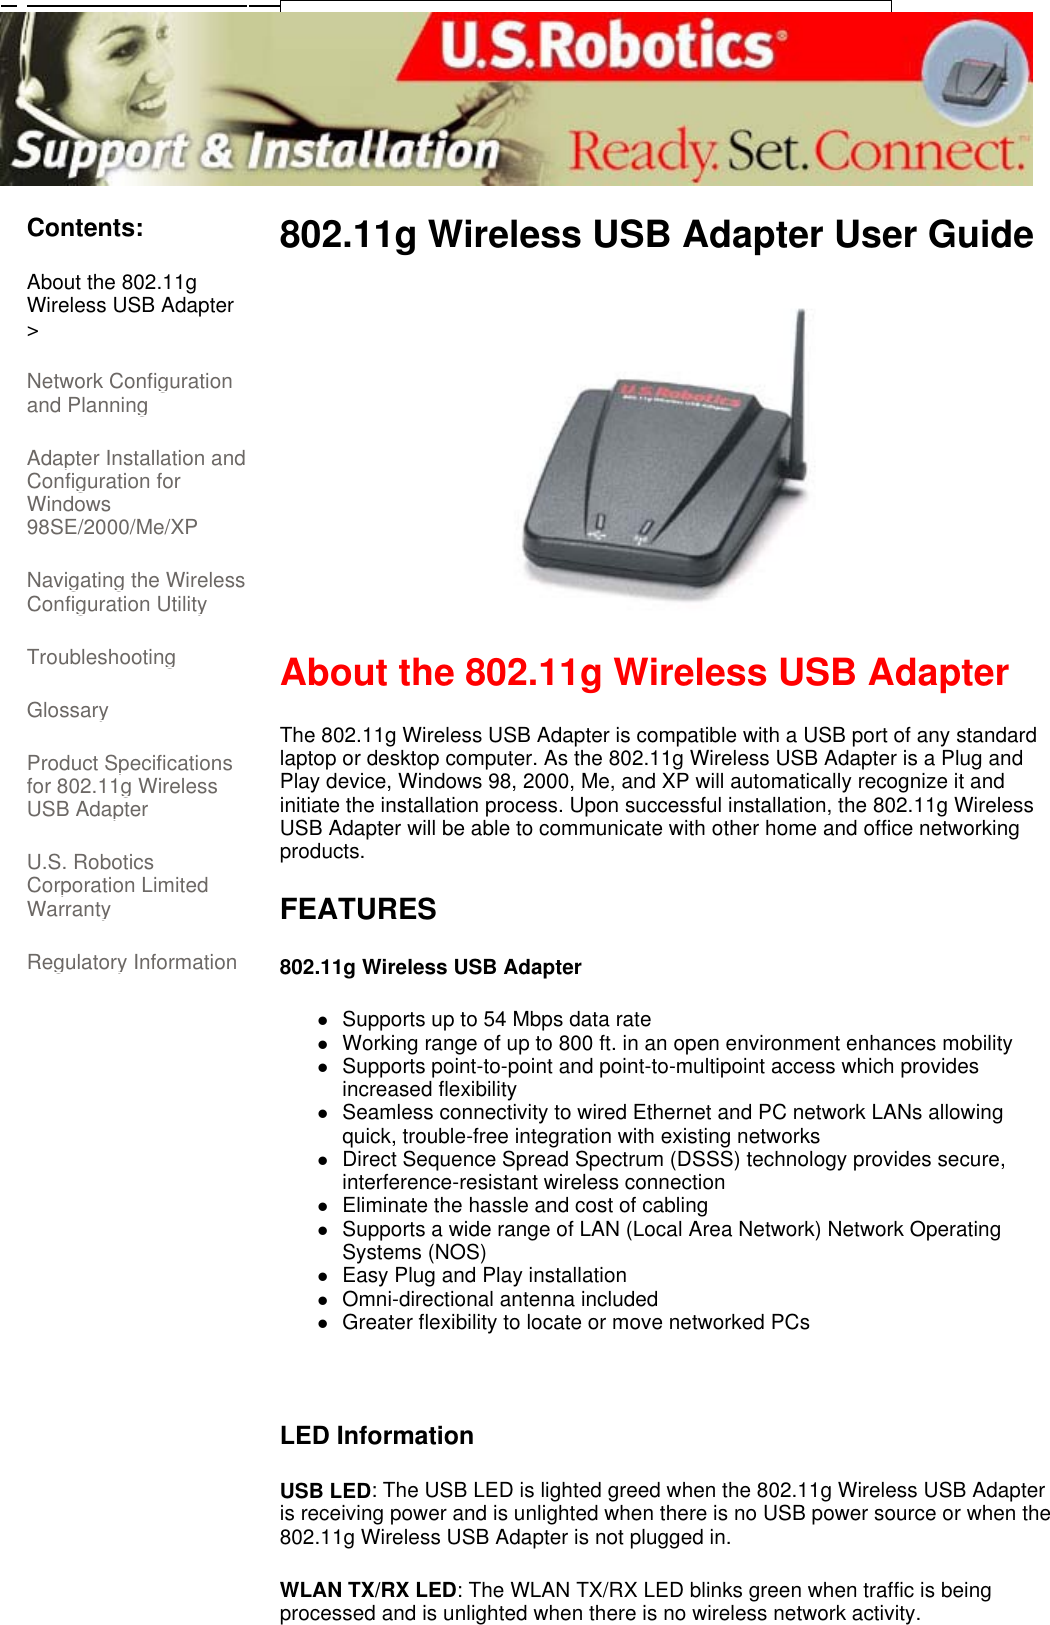      Contents: About the 802.11g Wireless USB Adapter &gt; Network Configuration and Planning  Adapter Installation and Configuration for Windows 98SE/2000/Me/XP Navigating the Wireless Configuration Utility Troubleshooting  Glossary  Product Specifications for 802.11g Wireless USB Adapter  U.S. Robotics Corporation Limited Warranty  Regulatory Information 802.11g Wireless USB Adapter User Guide   About the 802.11g Wireless USB Adapter The 802.11g Wireless USB Adapter is compatible with a USB port of any standard laptop or desktop computer. As the 802.11g Wireless USB Adapter is a Plug and Play device, Windows 98, 2000, Me, and XP will automatically recognize it and initiate the installation process. Upon successful installation, the 802.11g Wireless USB Adapter will be able to communicate with other home and office networking products.  FEATURES 802.11g Wireless USB Adapter  zSupports up to 54 Mbps data rate  zWorking range of up to 800 ft. in an open environment enhances mobility  zSupports point-to-point and point-to-multipoint access which provides increased flexibility  zSeamless connectivity to wired Ethernet and PC network LANs allowing quick, trouble-free integration with existing networks  zDirect Sequence Spread Spectrum (DSSS) technology provides secure, interference-resistant wireless connection  zEliminate the hassle and cost of cabling  zSupports a wide range of LAN (Local Area Network) Network Operating Systems (NOS)  zEasy Plug and Play installation  zOmni-directional antenna included  zGreater flexibility to locate or move networked PCs    LED Information USB LED: The USB LED is lighted greed when the 802.11g Wireless USB Adapter is receiving power and is unlighted when there is no USB power source or when the 802.11g Wireless USB Adapter is not plugged in.  WLAN TX/RX LED: The WLAN TX/RX LED blinks green when traffic is being processed and is unlighted when there is no wireless network activity.  